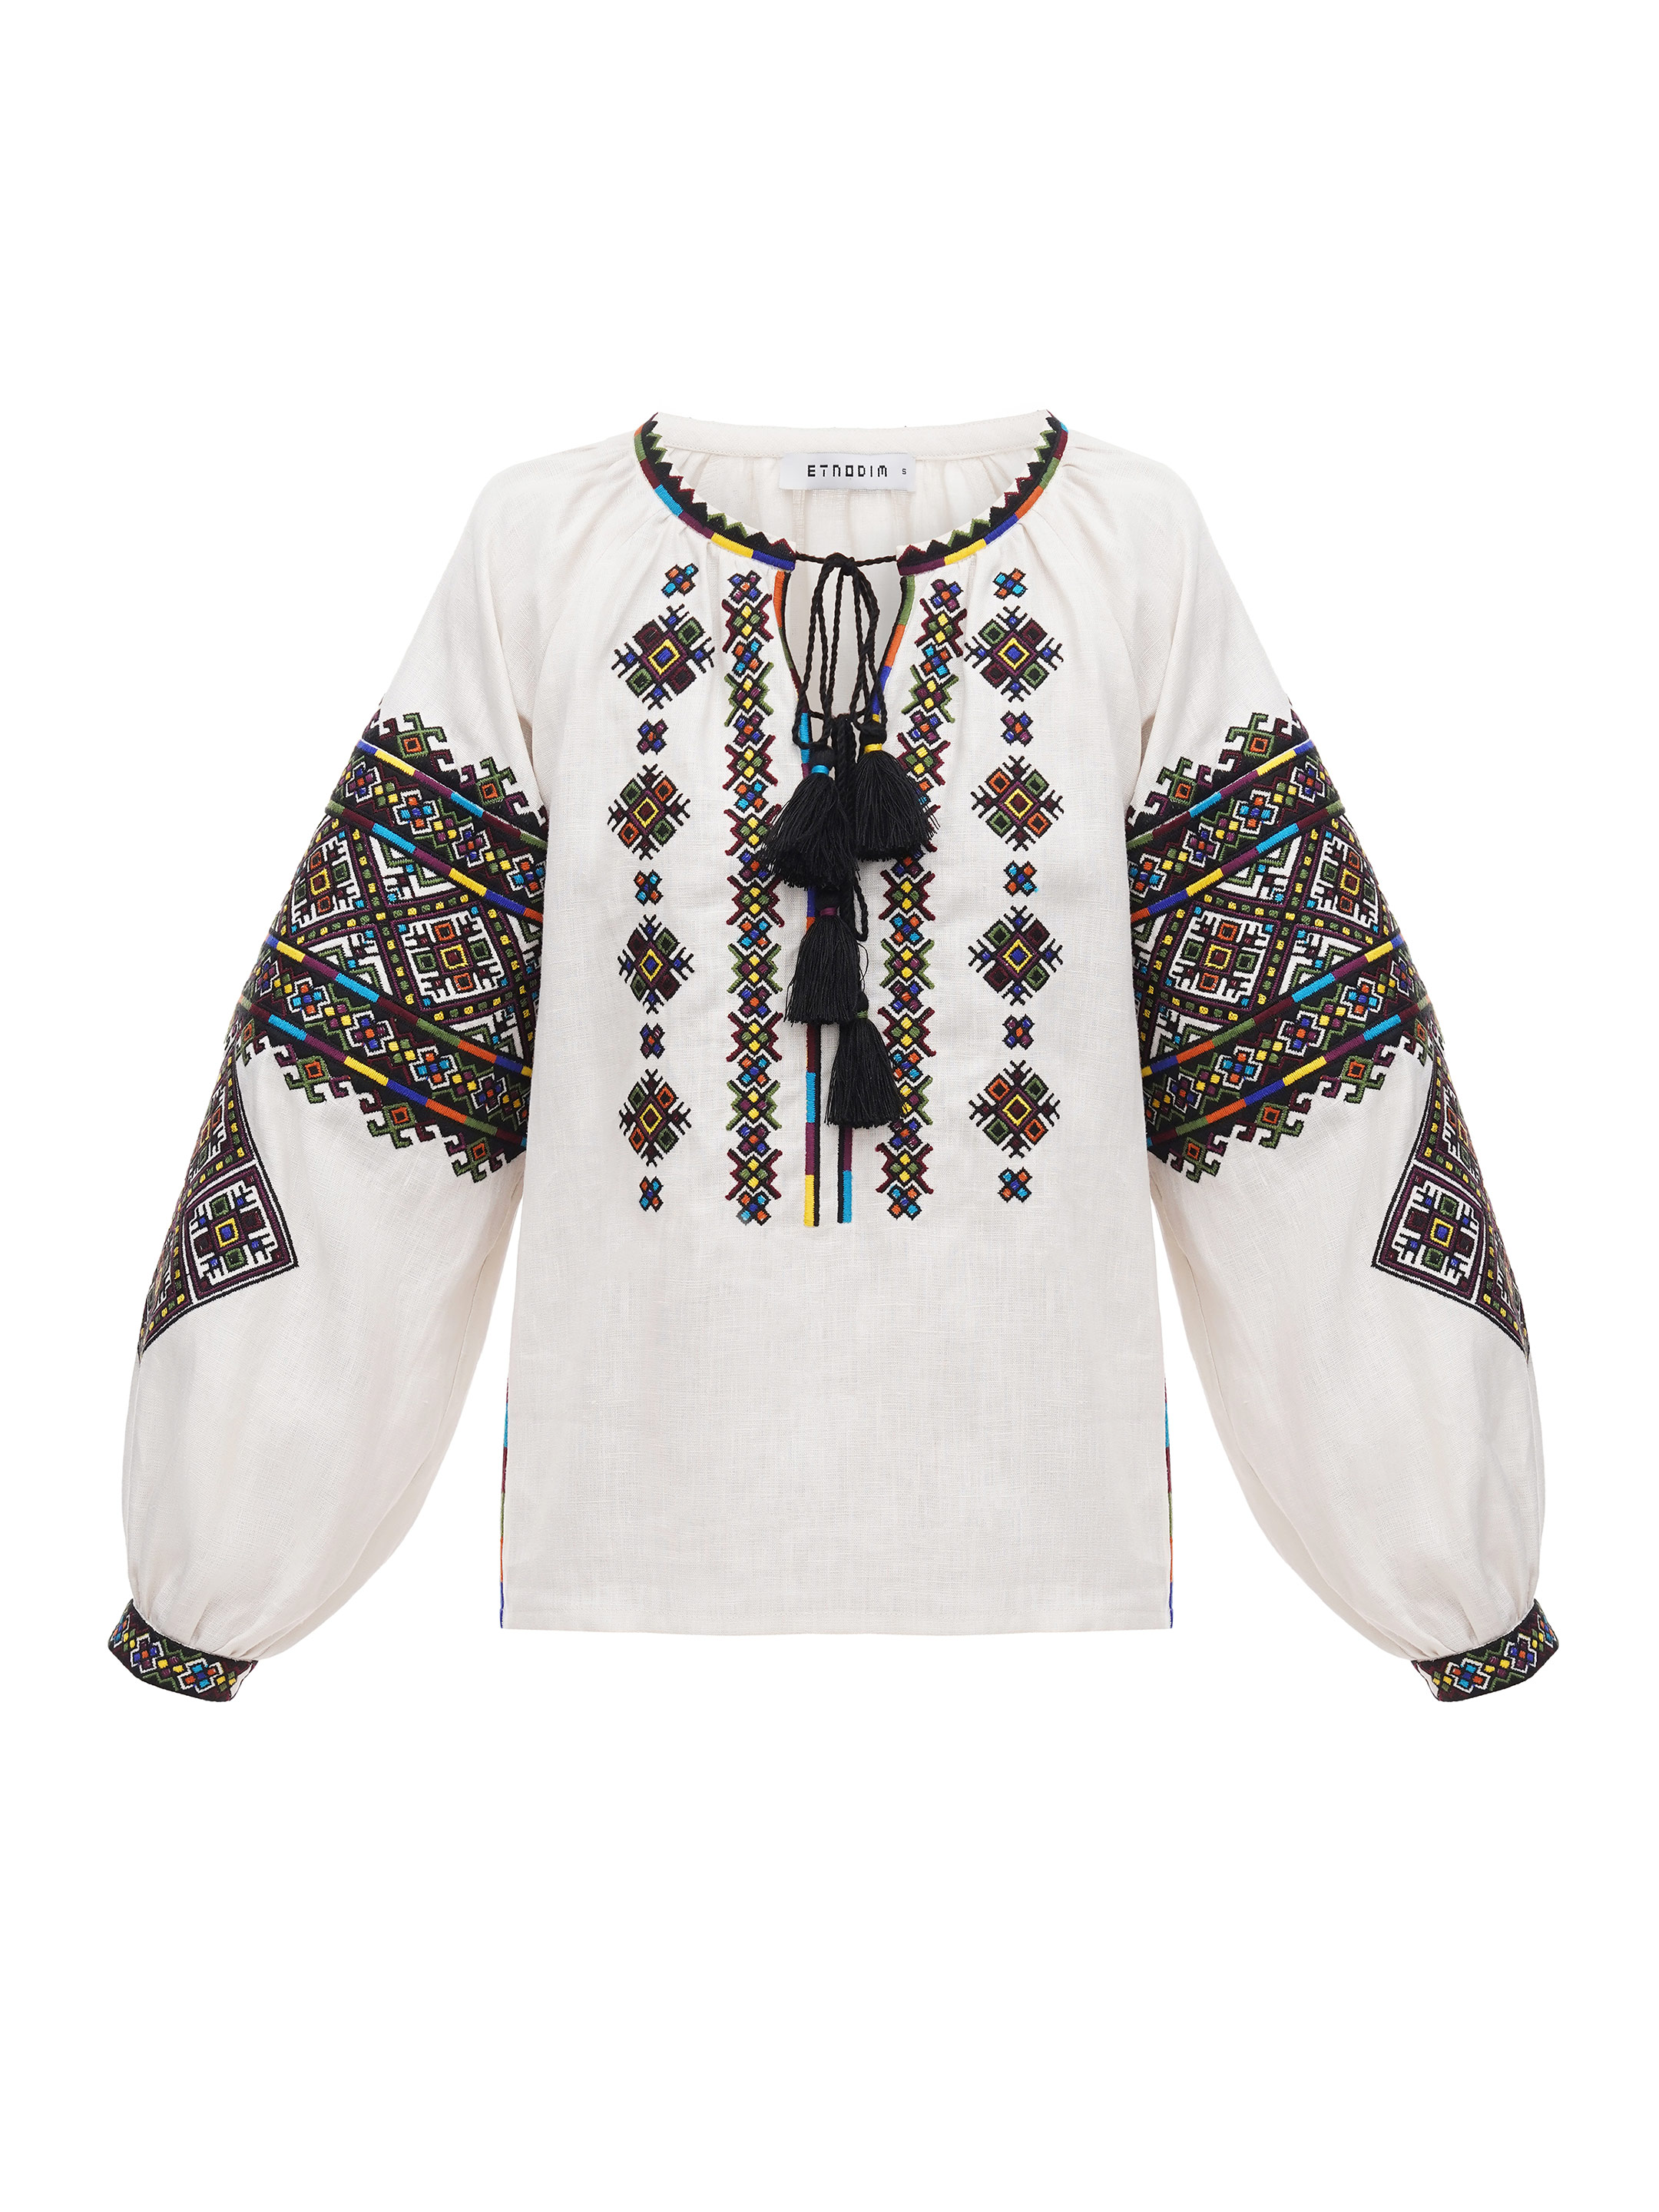 Women's embroidered shirt of the Pokuttia region Galych